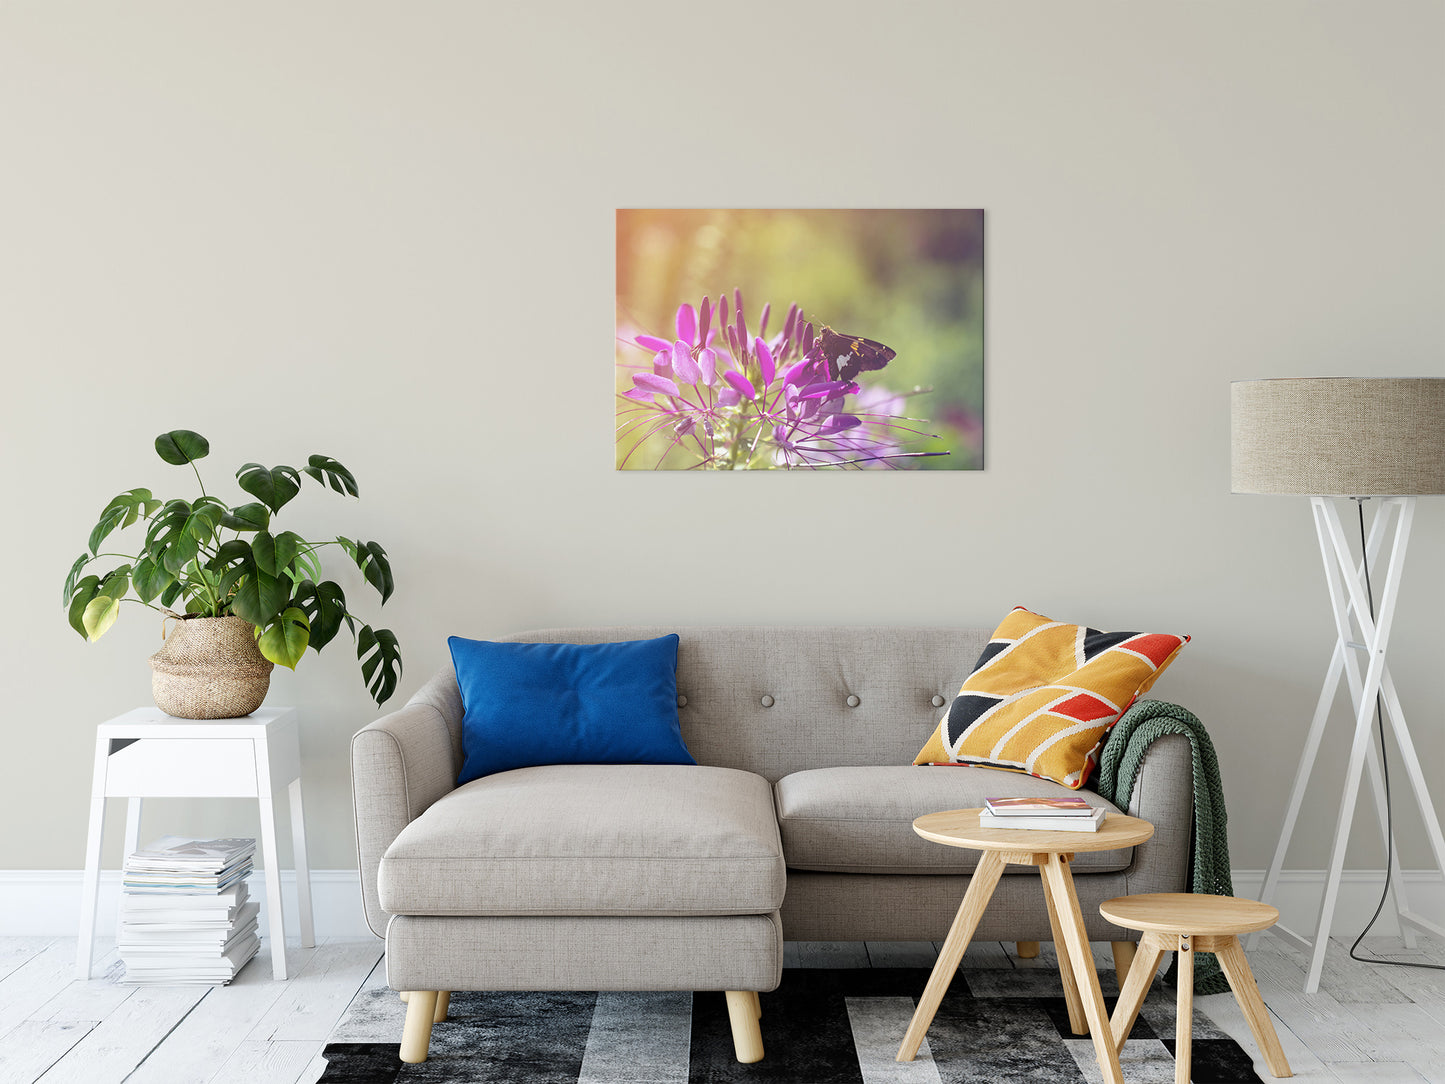 Spider Flower in Glory Light Floral Photo Fine Art Canvas Wall Art Prints 24" x 36" - PIPAFINEART